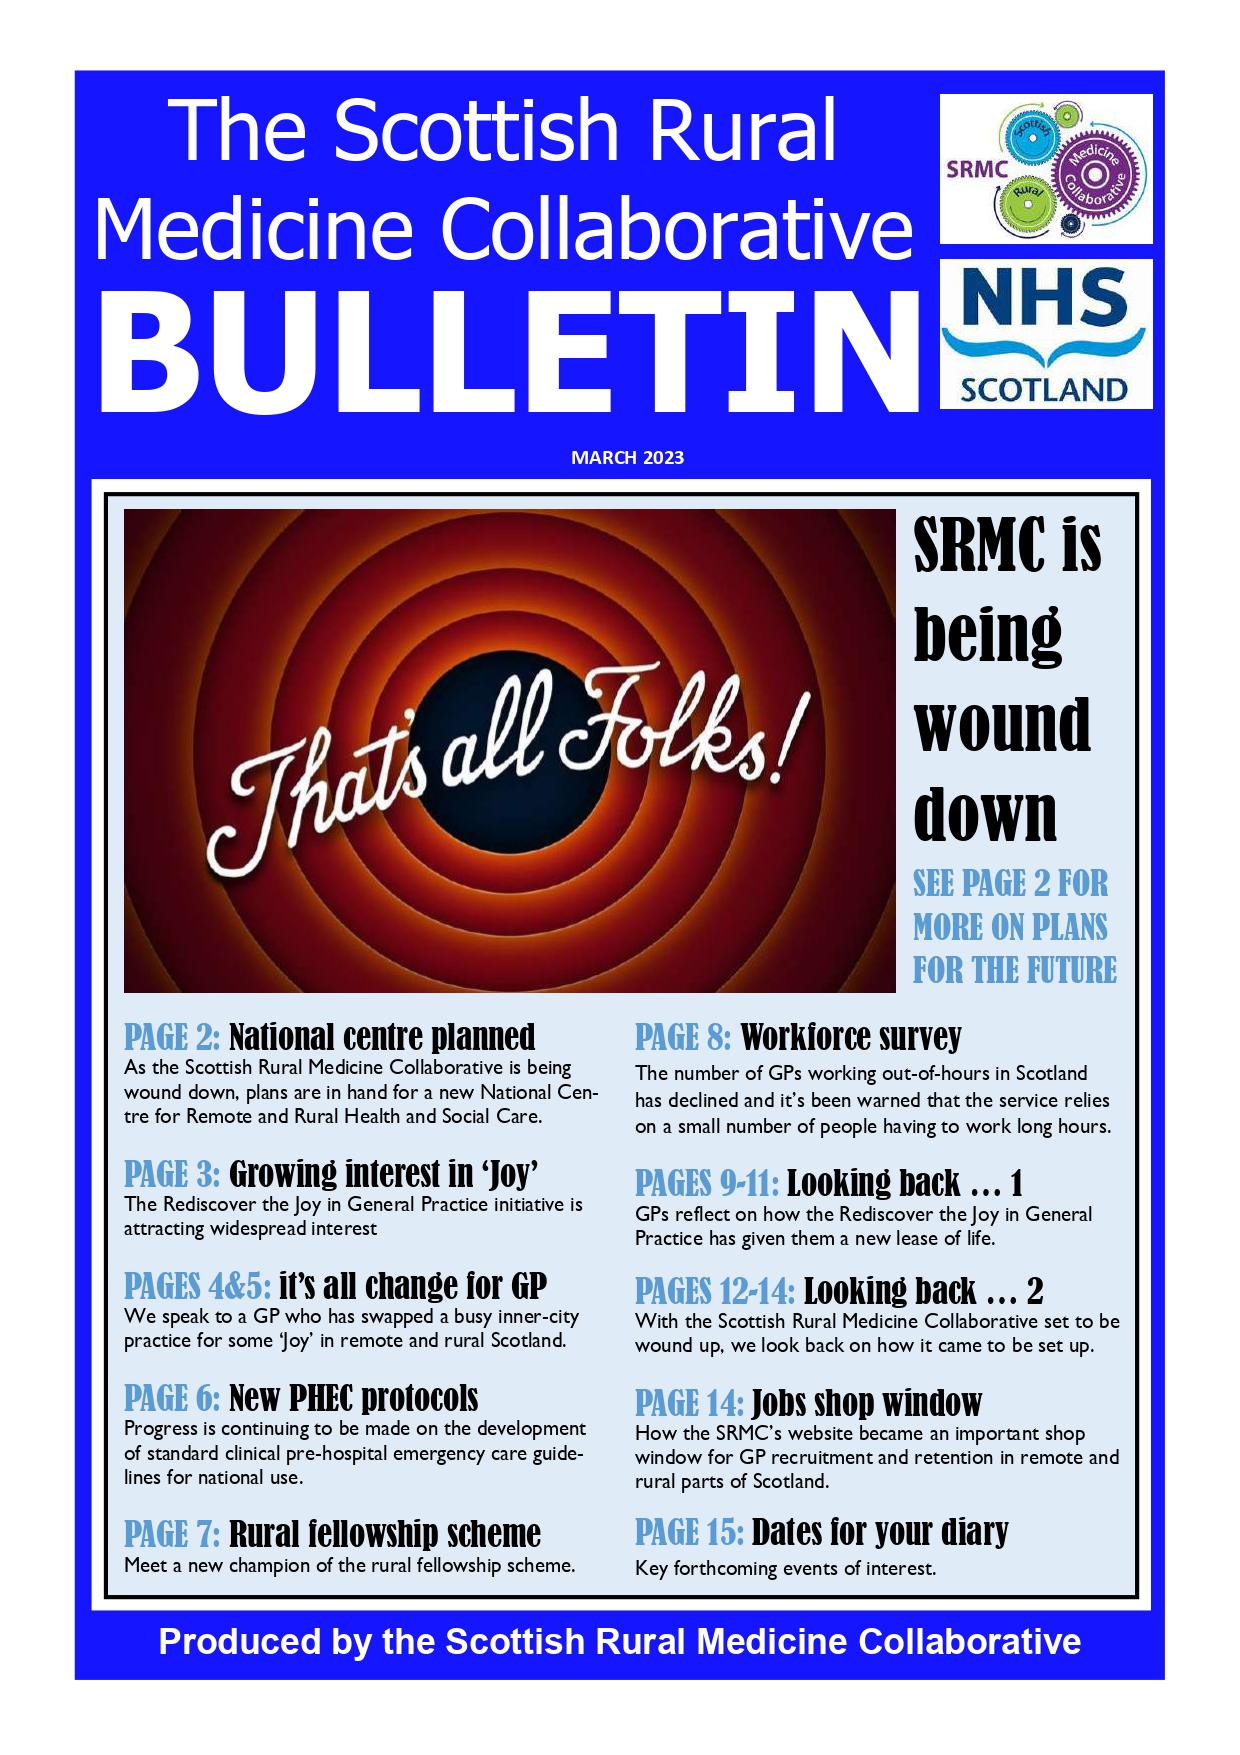 Newsletters - SRMC Bulletin March 2023 front page